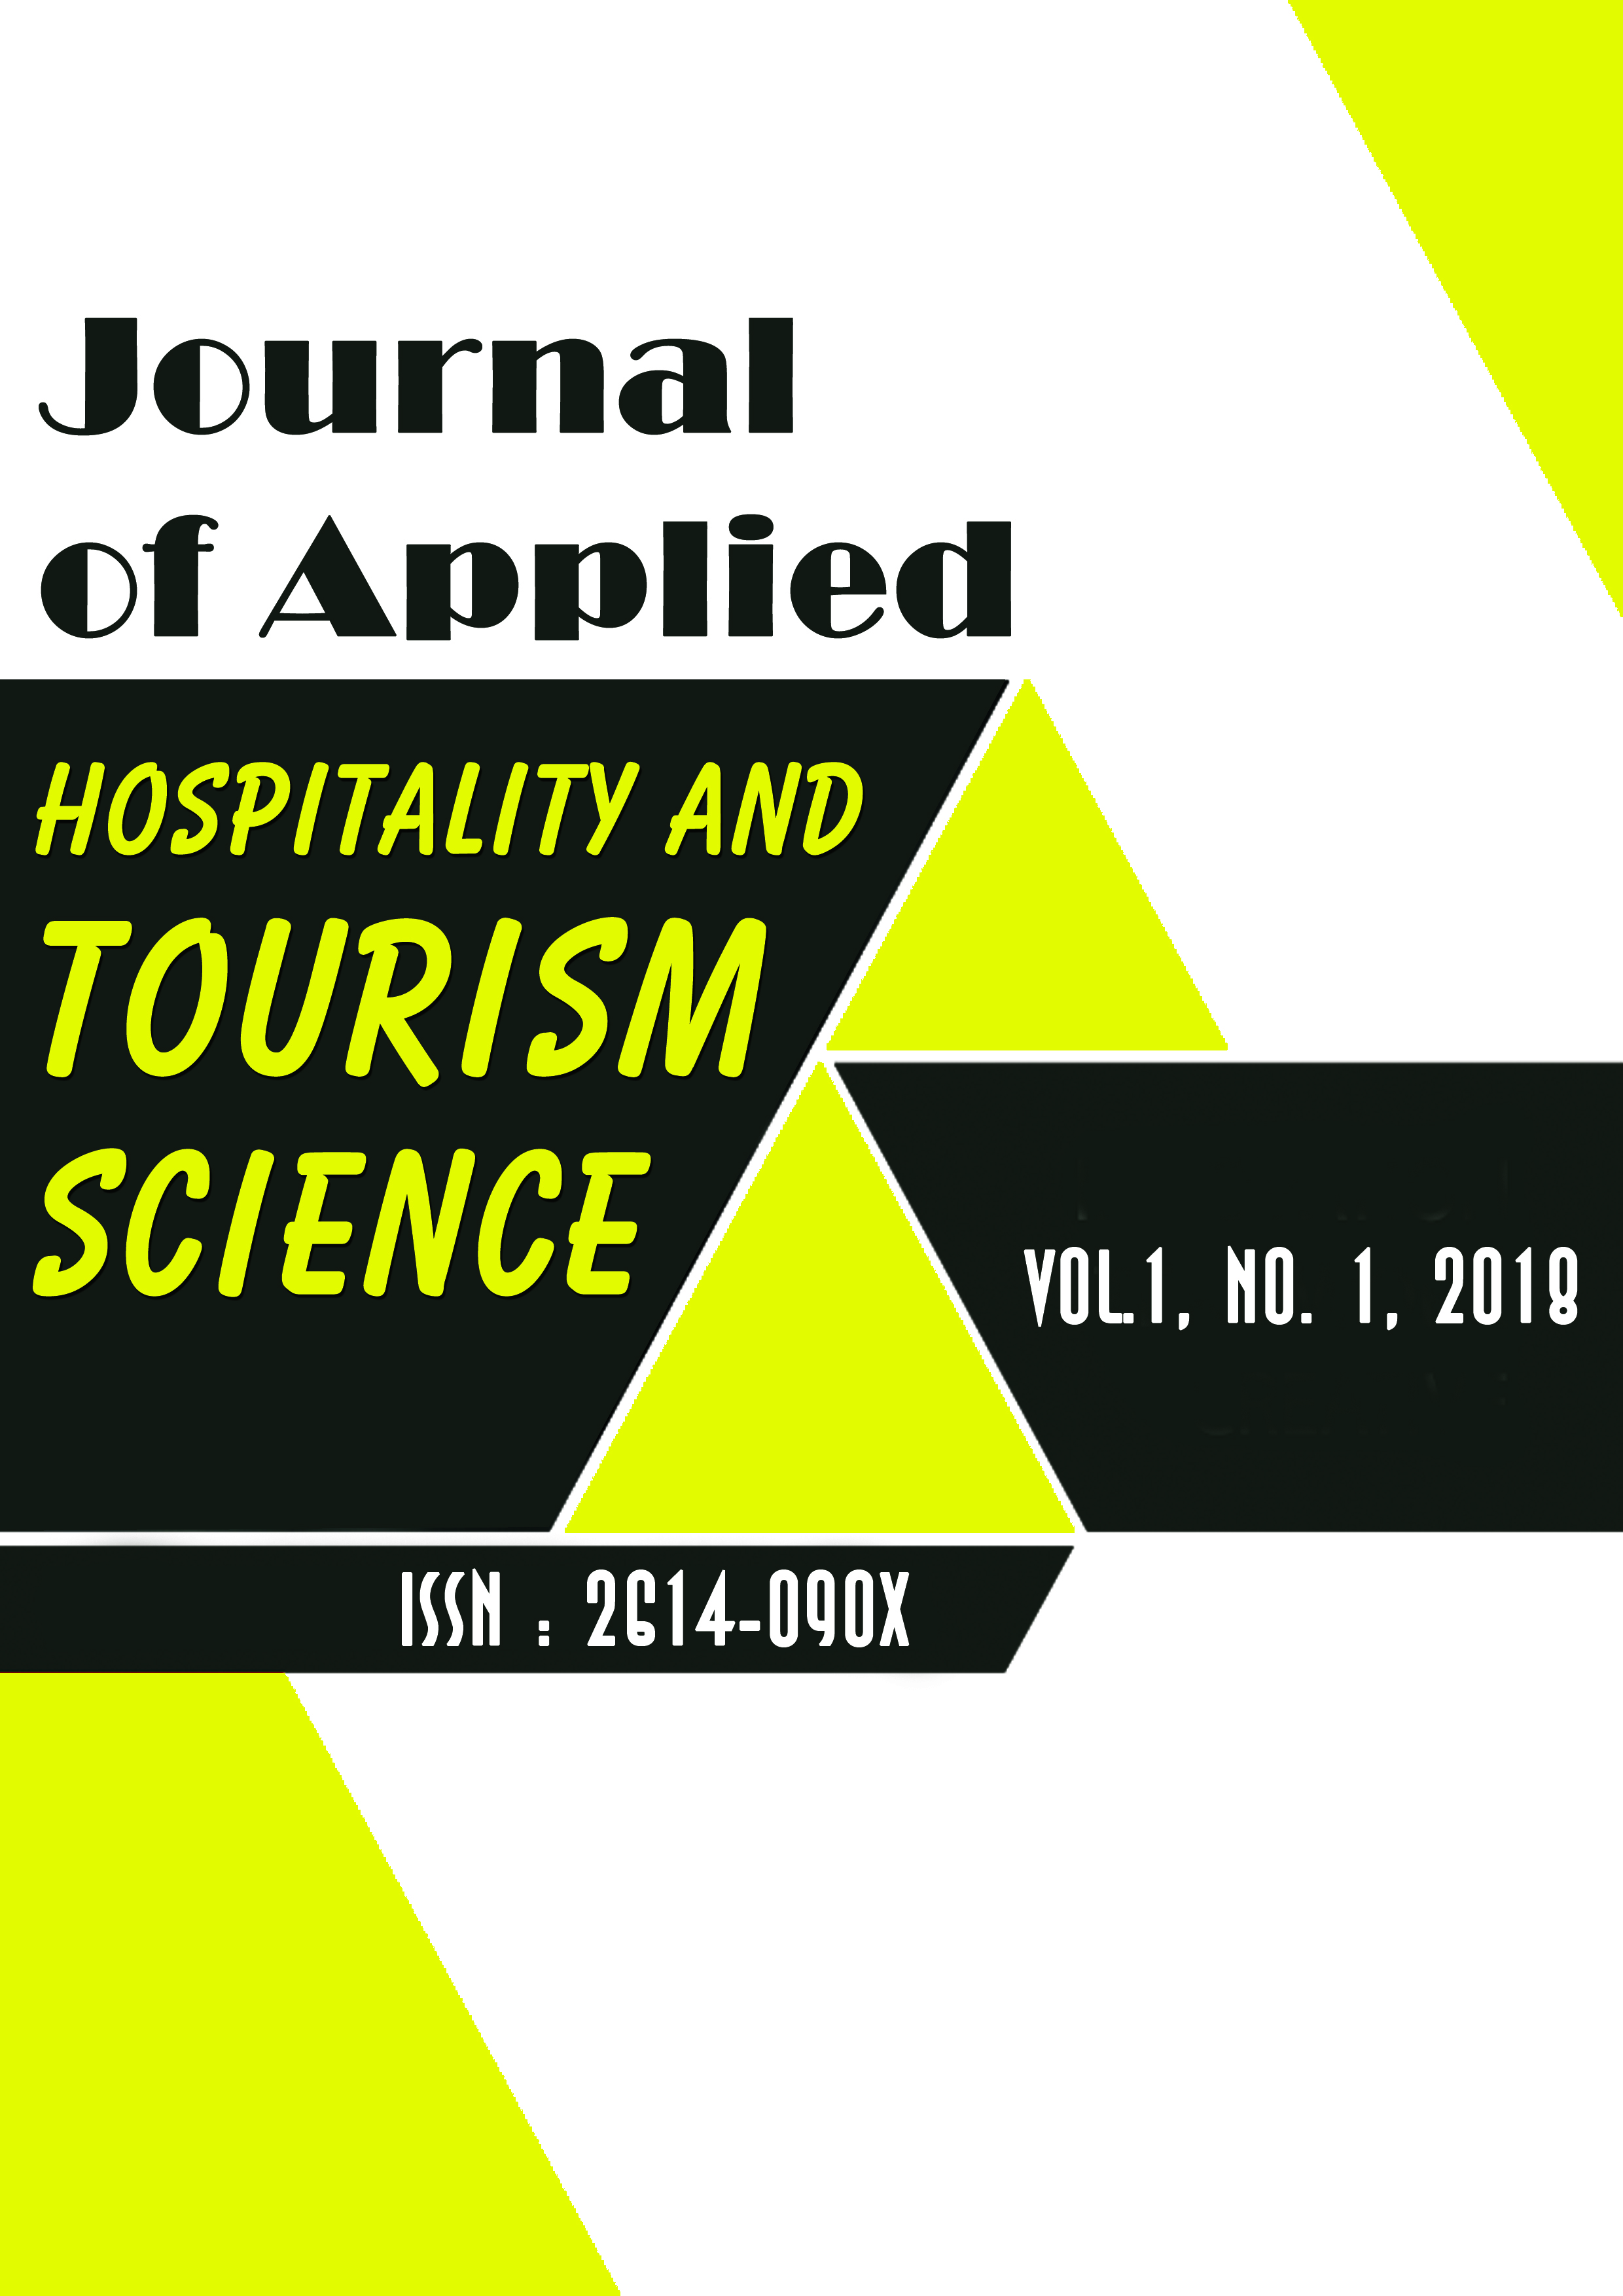 					View Vol. 1 No. 1 July (2018): Journal of Applied Hospitality and Tourism Science
				